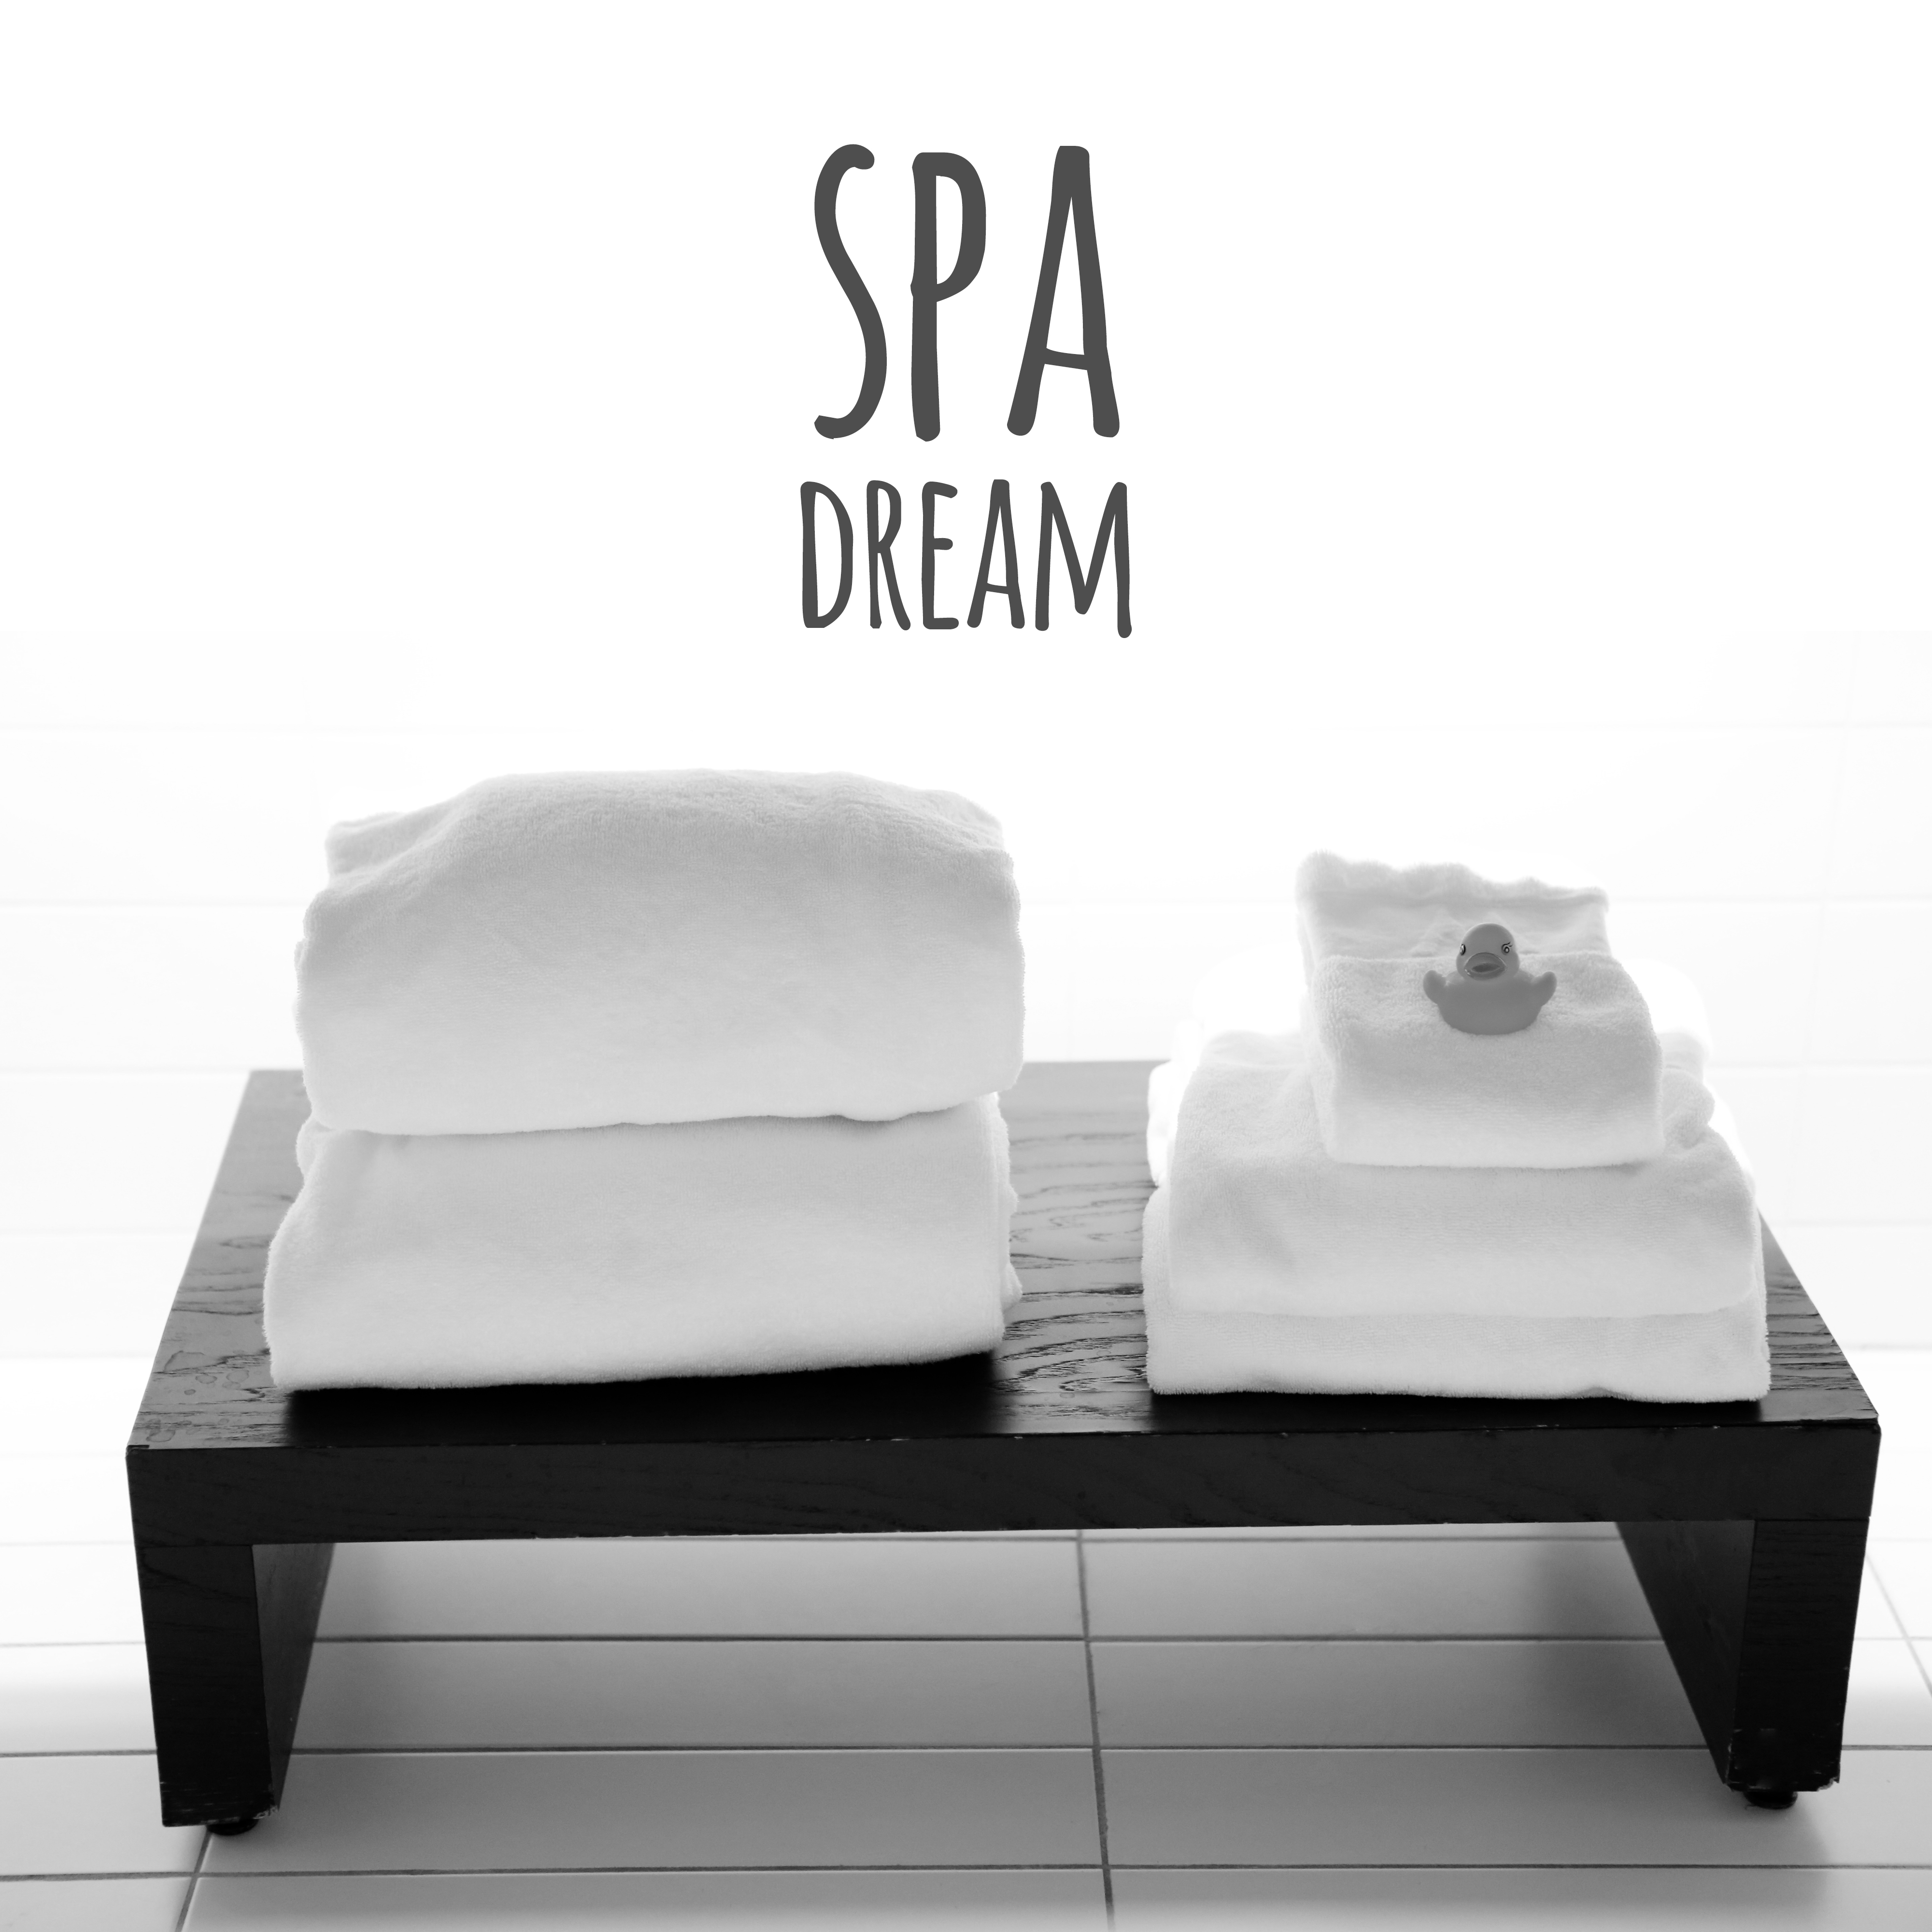 Spa Dream – Best Spa Music for Time to Relax in Spa Hotel, Wonderful Sounds of Nature for Deep Relax, Spa Massage Music, Spa Music